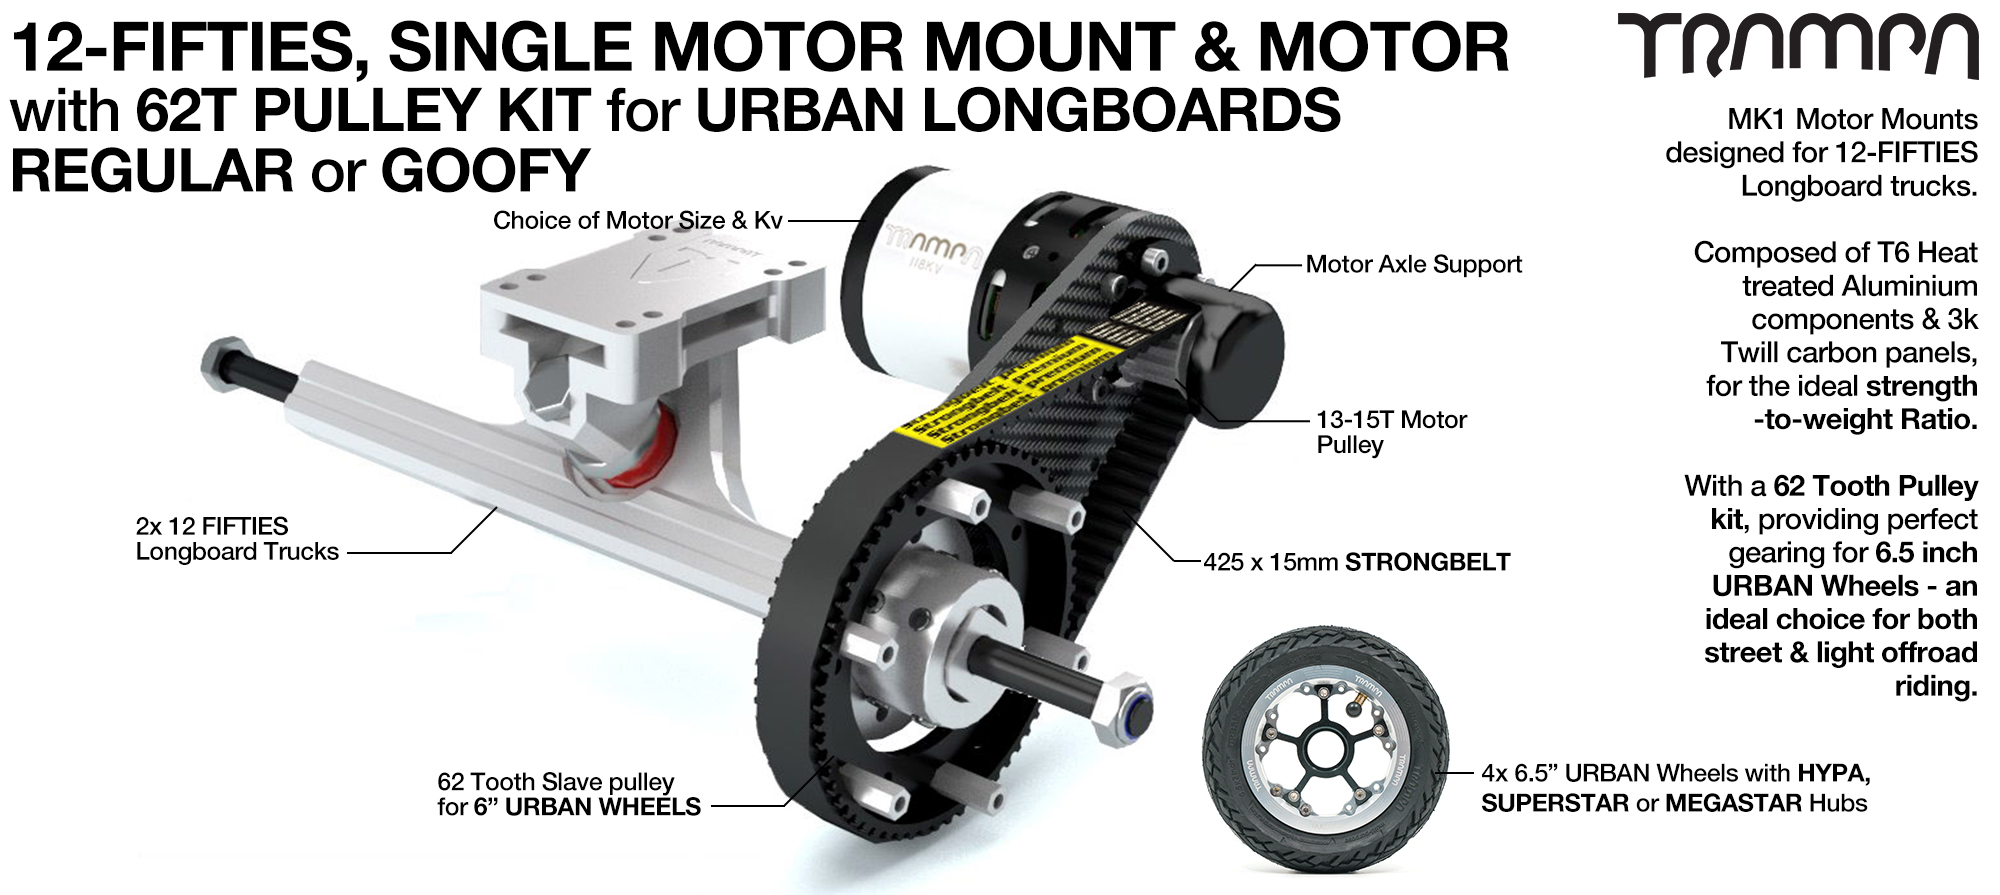 12FiFties Truck with SINGLE Motor Mount & 6364 Motor with 62T Pulley Kit & 4x URBAN Wheels - SINGLE